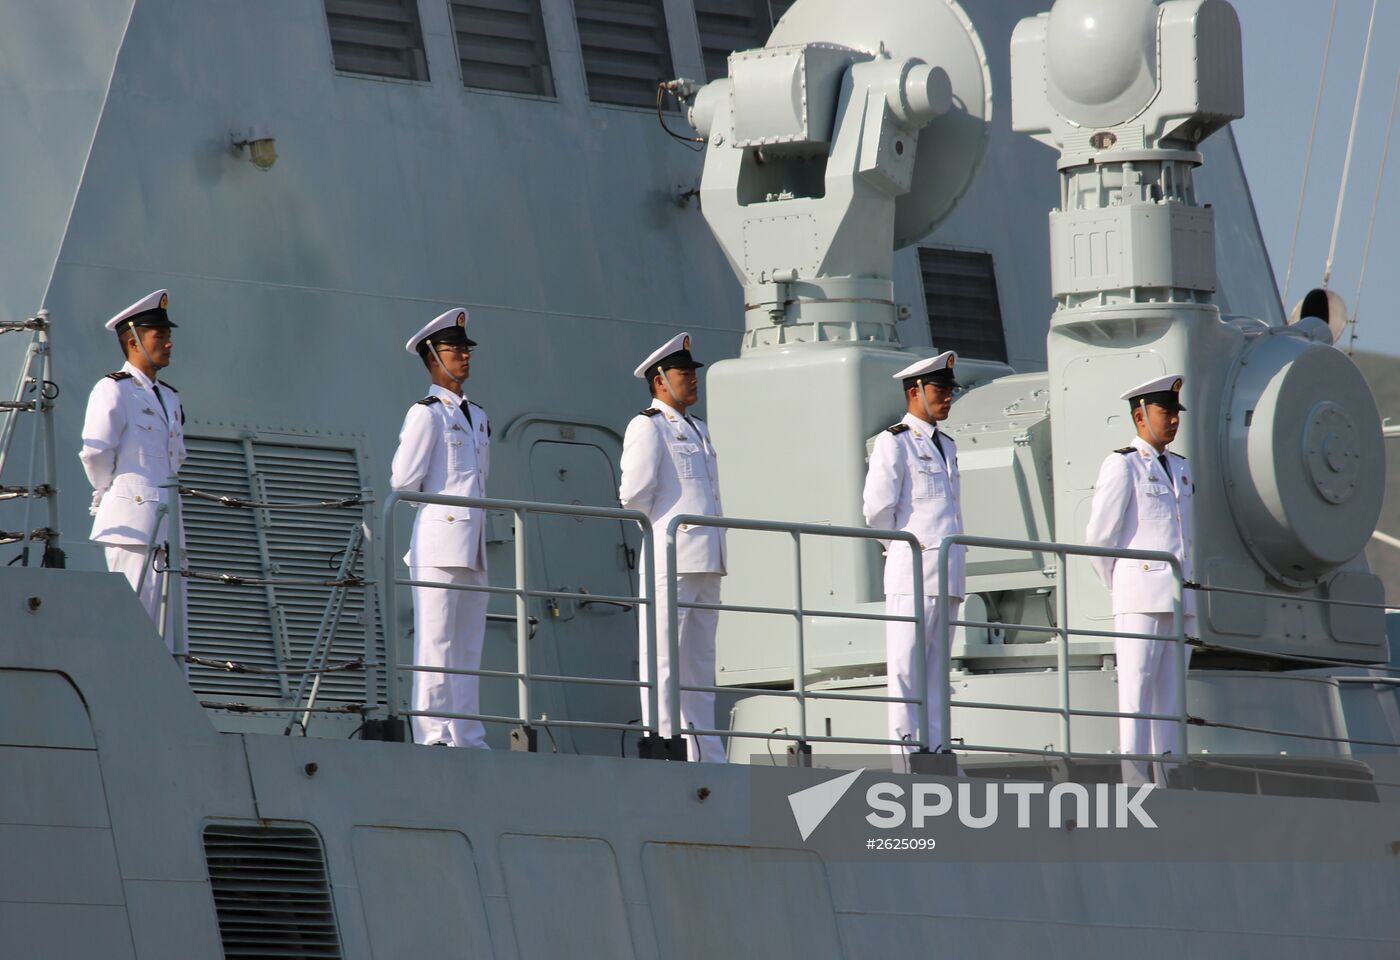 Russian-Chinese drills "Joint Sea-2015" kick off in Novorossiysk